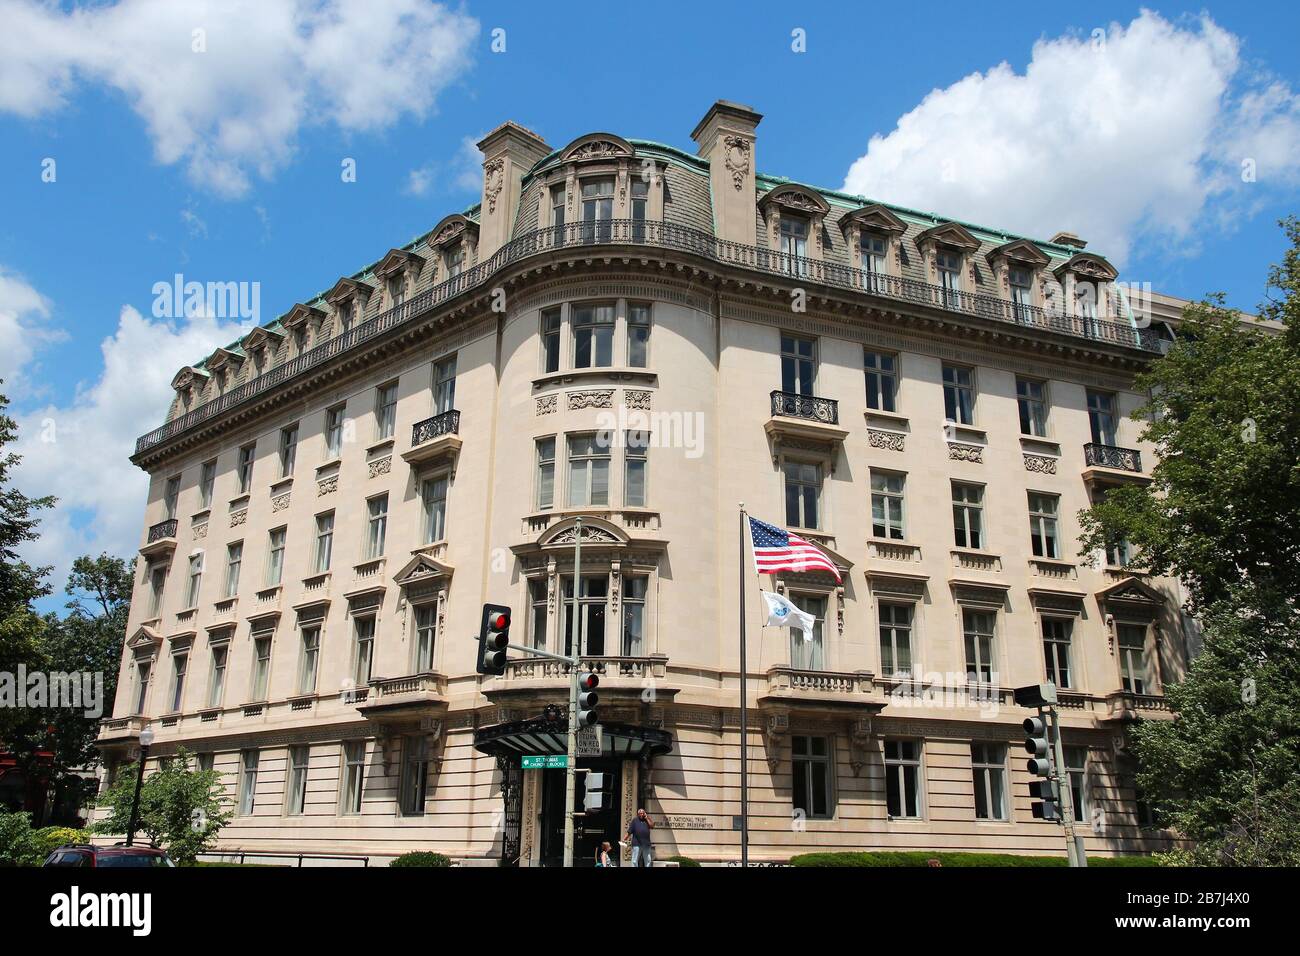 WASHINGTON, USA - JUNE 14, 2013: The National Trust For Historic Preservation building in Washington DC. The landmark building is also known as Washin Stock Photo